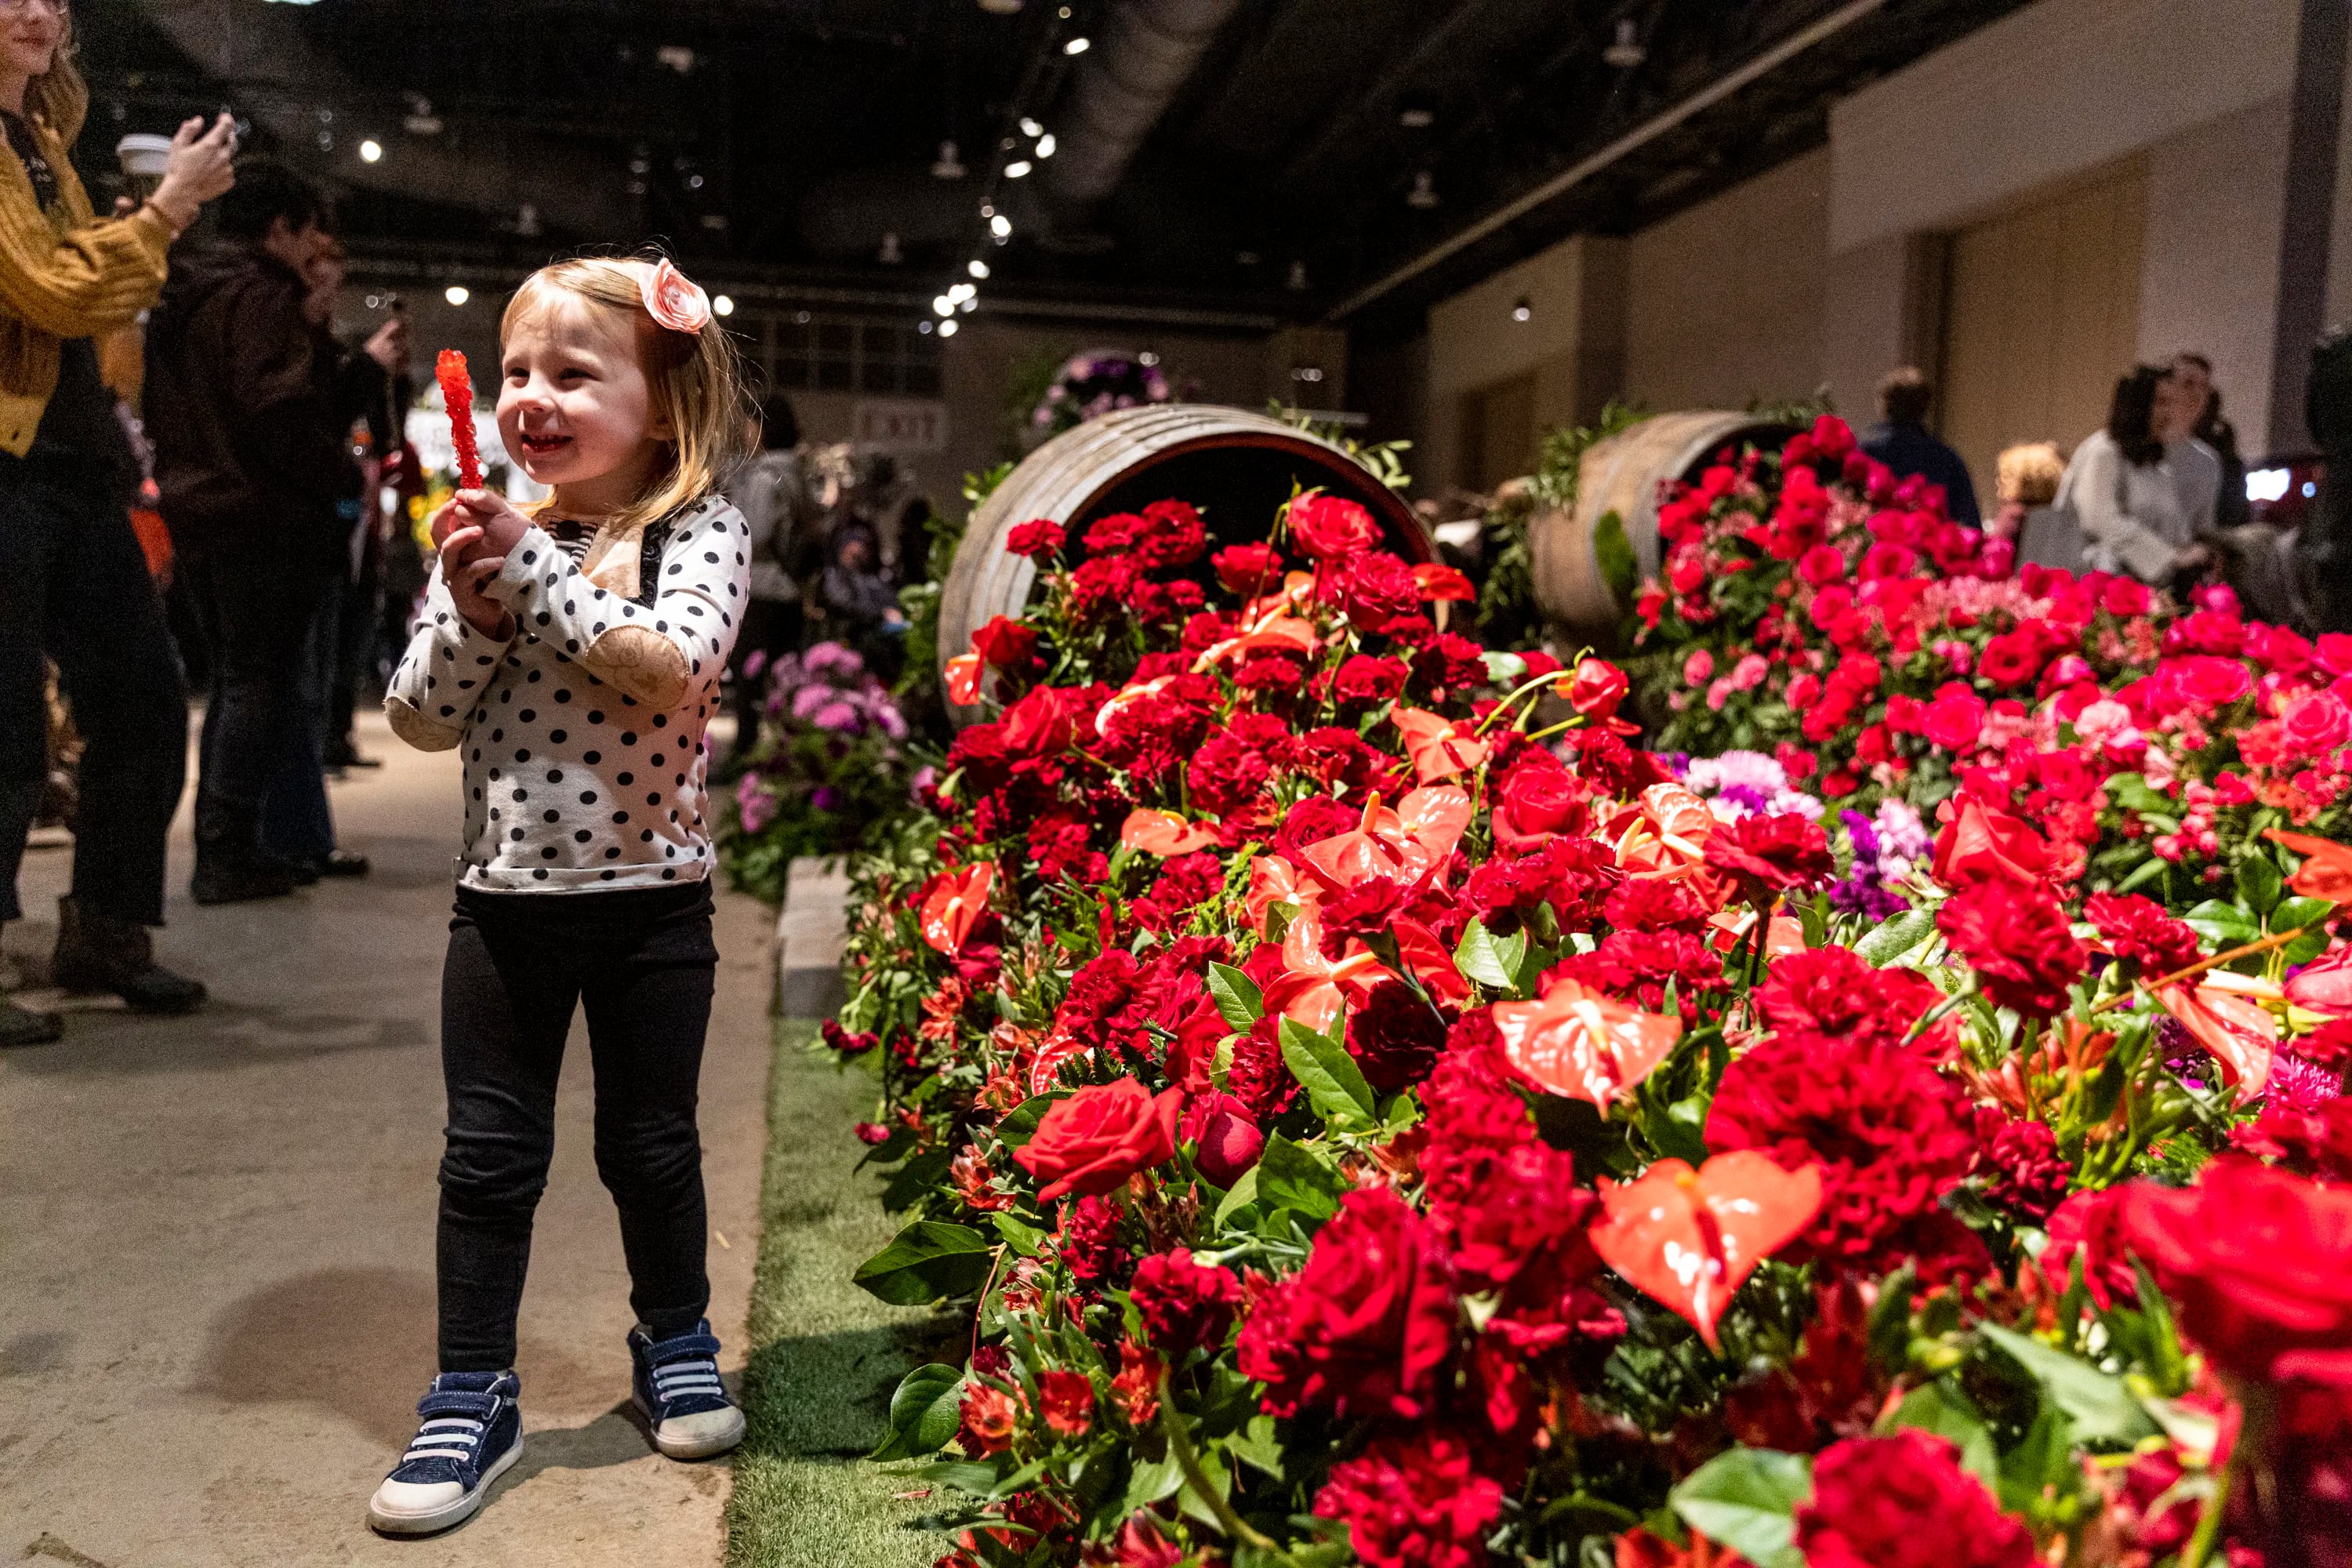 Ella Clark, 3, poses by the United Through Our Pour display by Black Girl Florists, while her mom, Jami Clark, of Narberth, Pa., takes a photo.